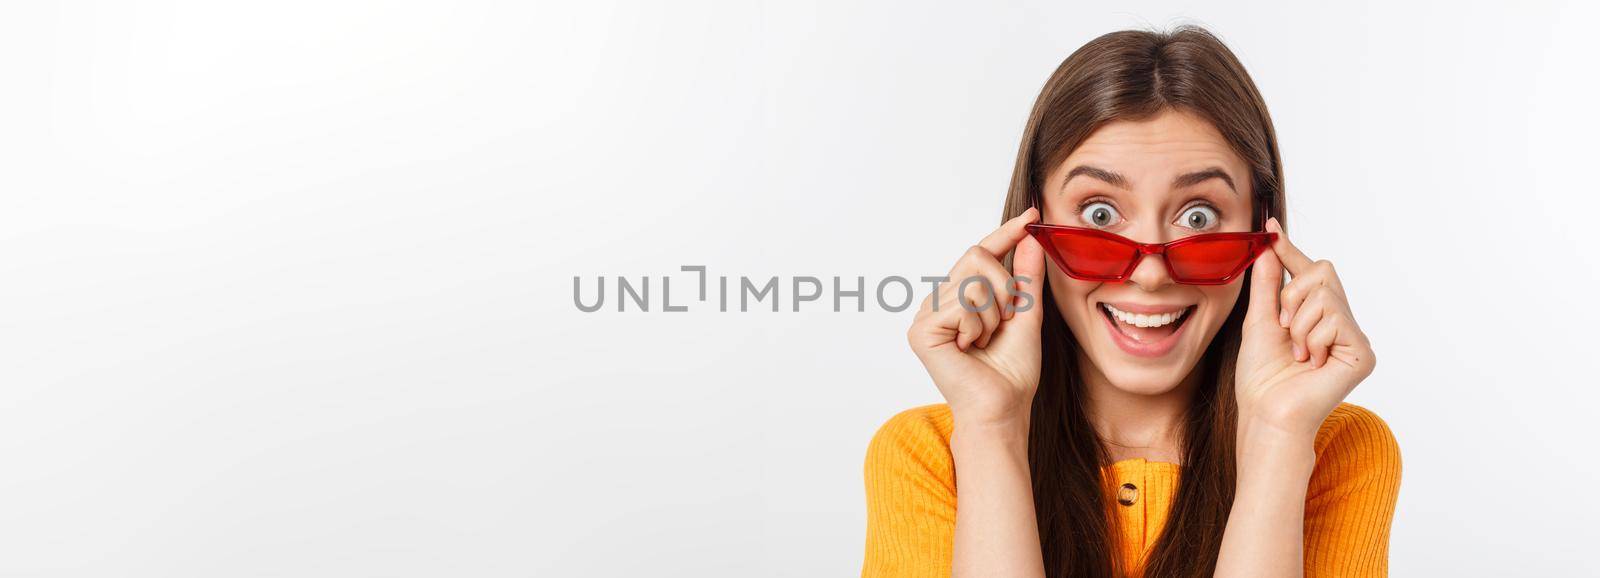 Fashion girl hipster in glasses. White background isolated